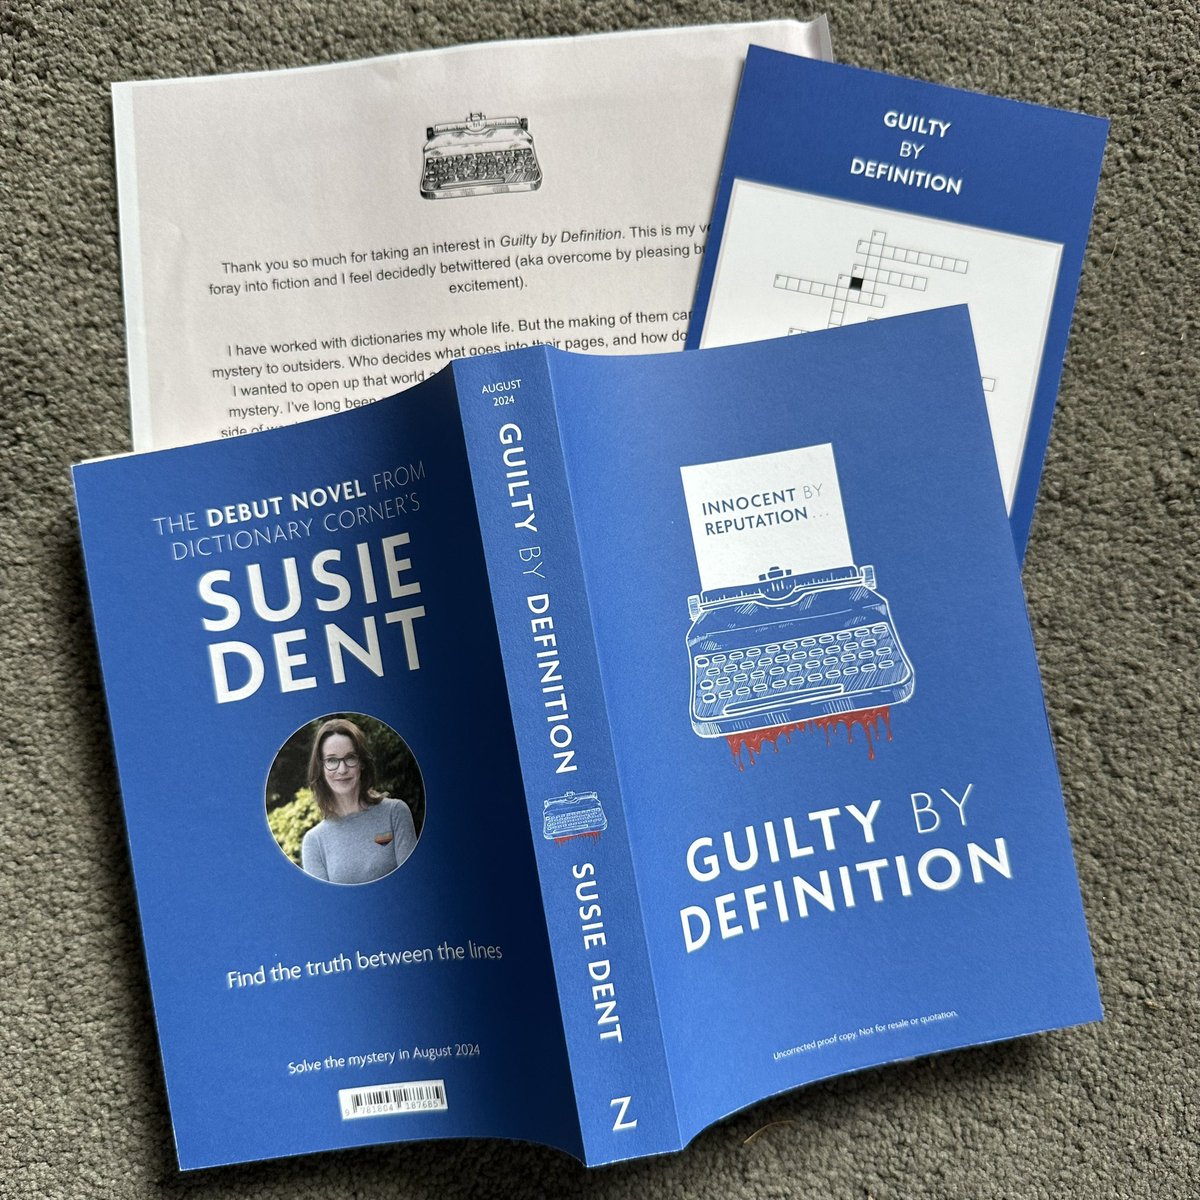 📚📮#BookPost📚📮 Looking forward to finding out the truth between the lines and solving the mystery in #GuiltyByDefinition by @susie_dent A huge thank you to @bonnierbooks_uk @ZaffreBooks @ElStammeijer and Sophie for sending this proof📖 #BookTwitter #BookBlogger